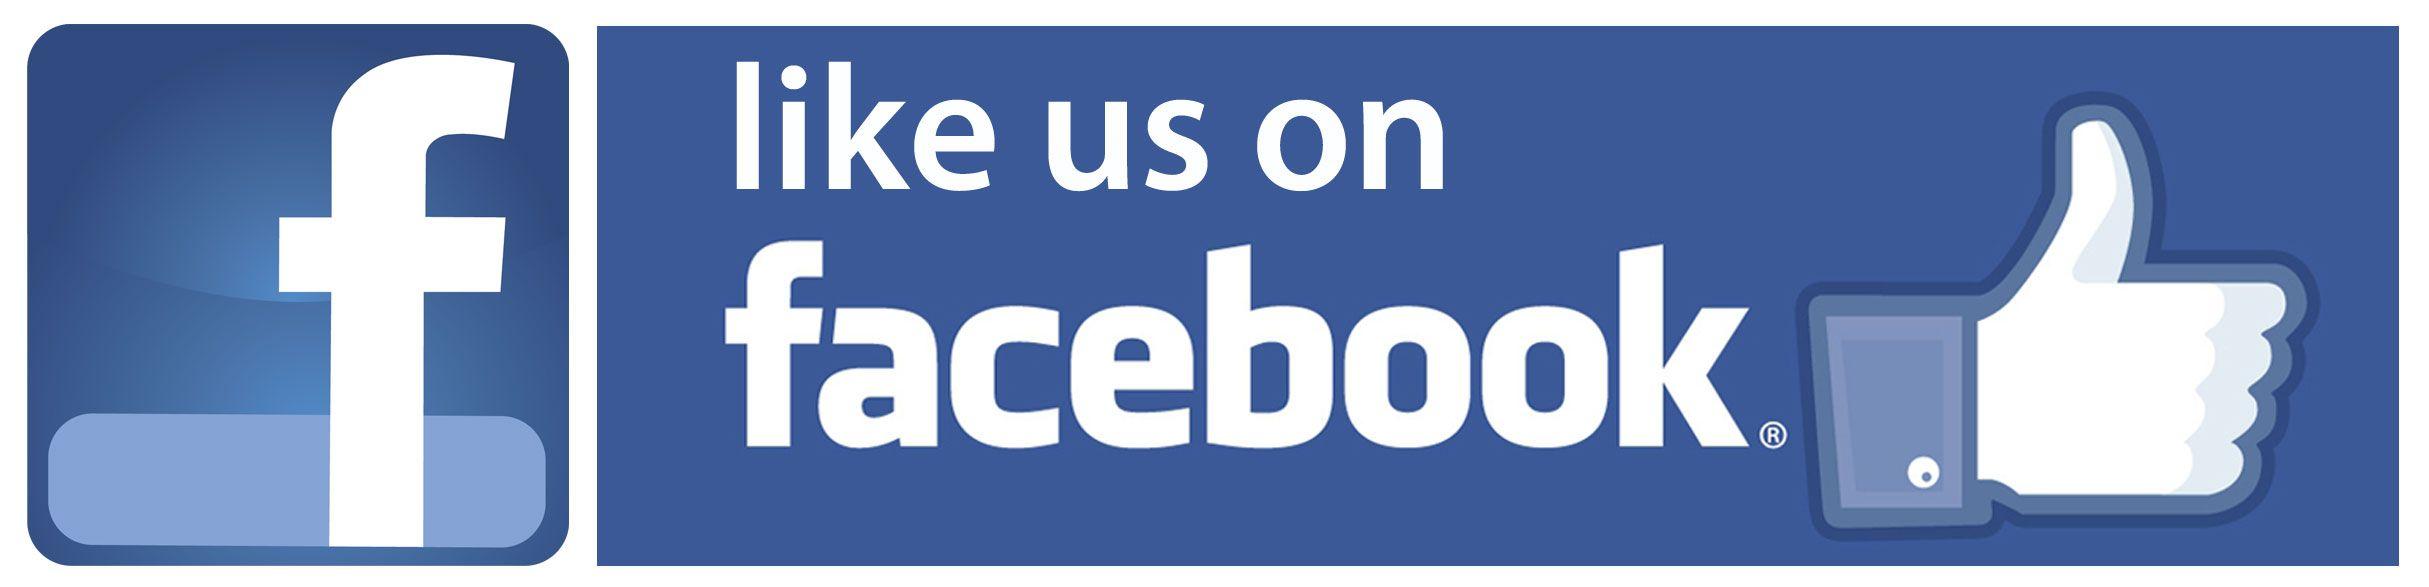 Find Us On Facebook Official Logo - City Mission Wanganui. What We Do